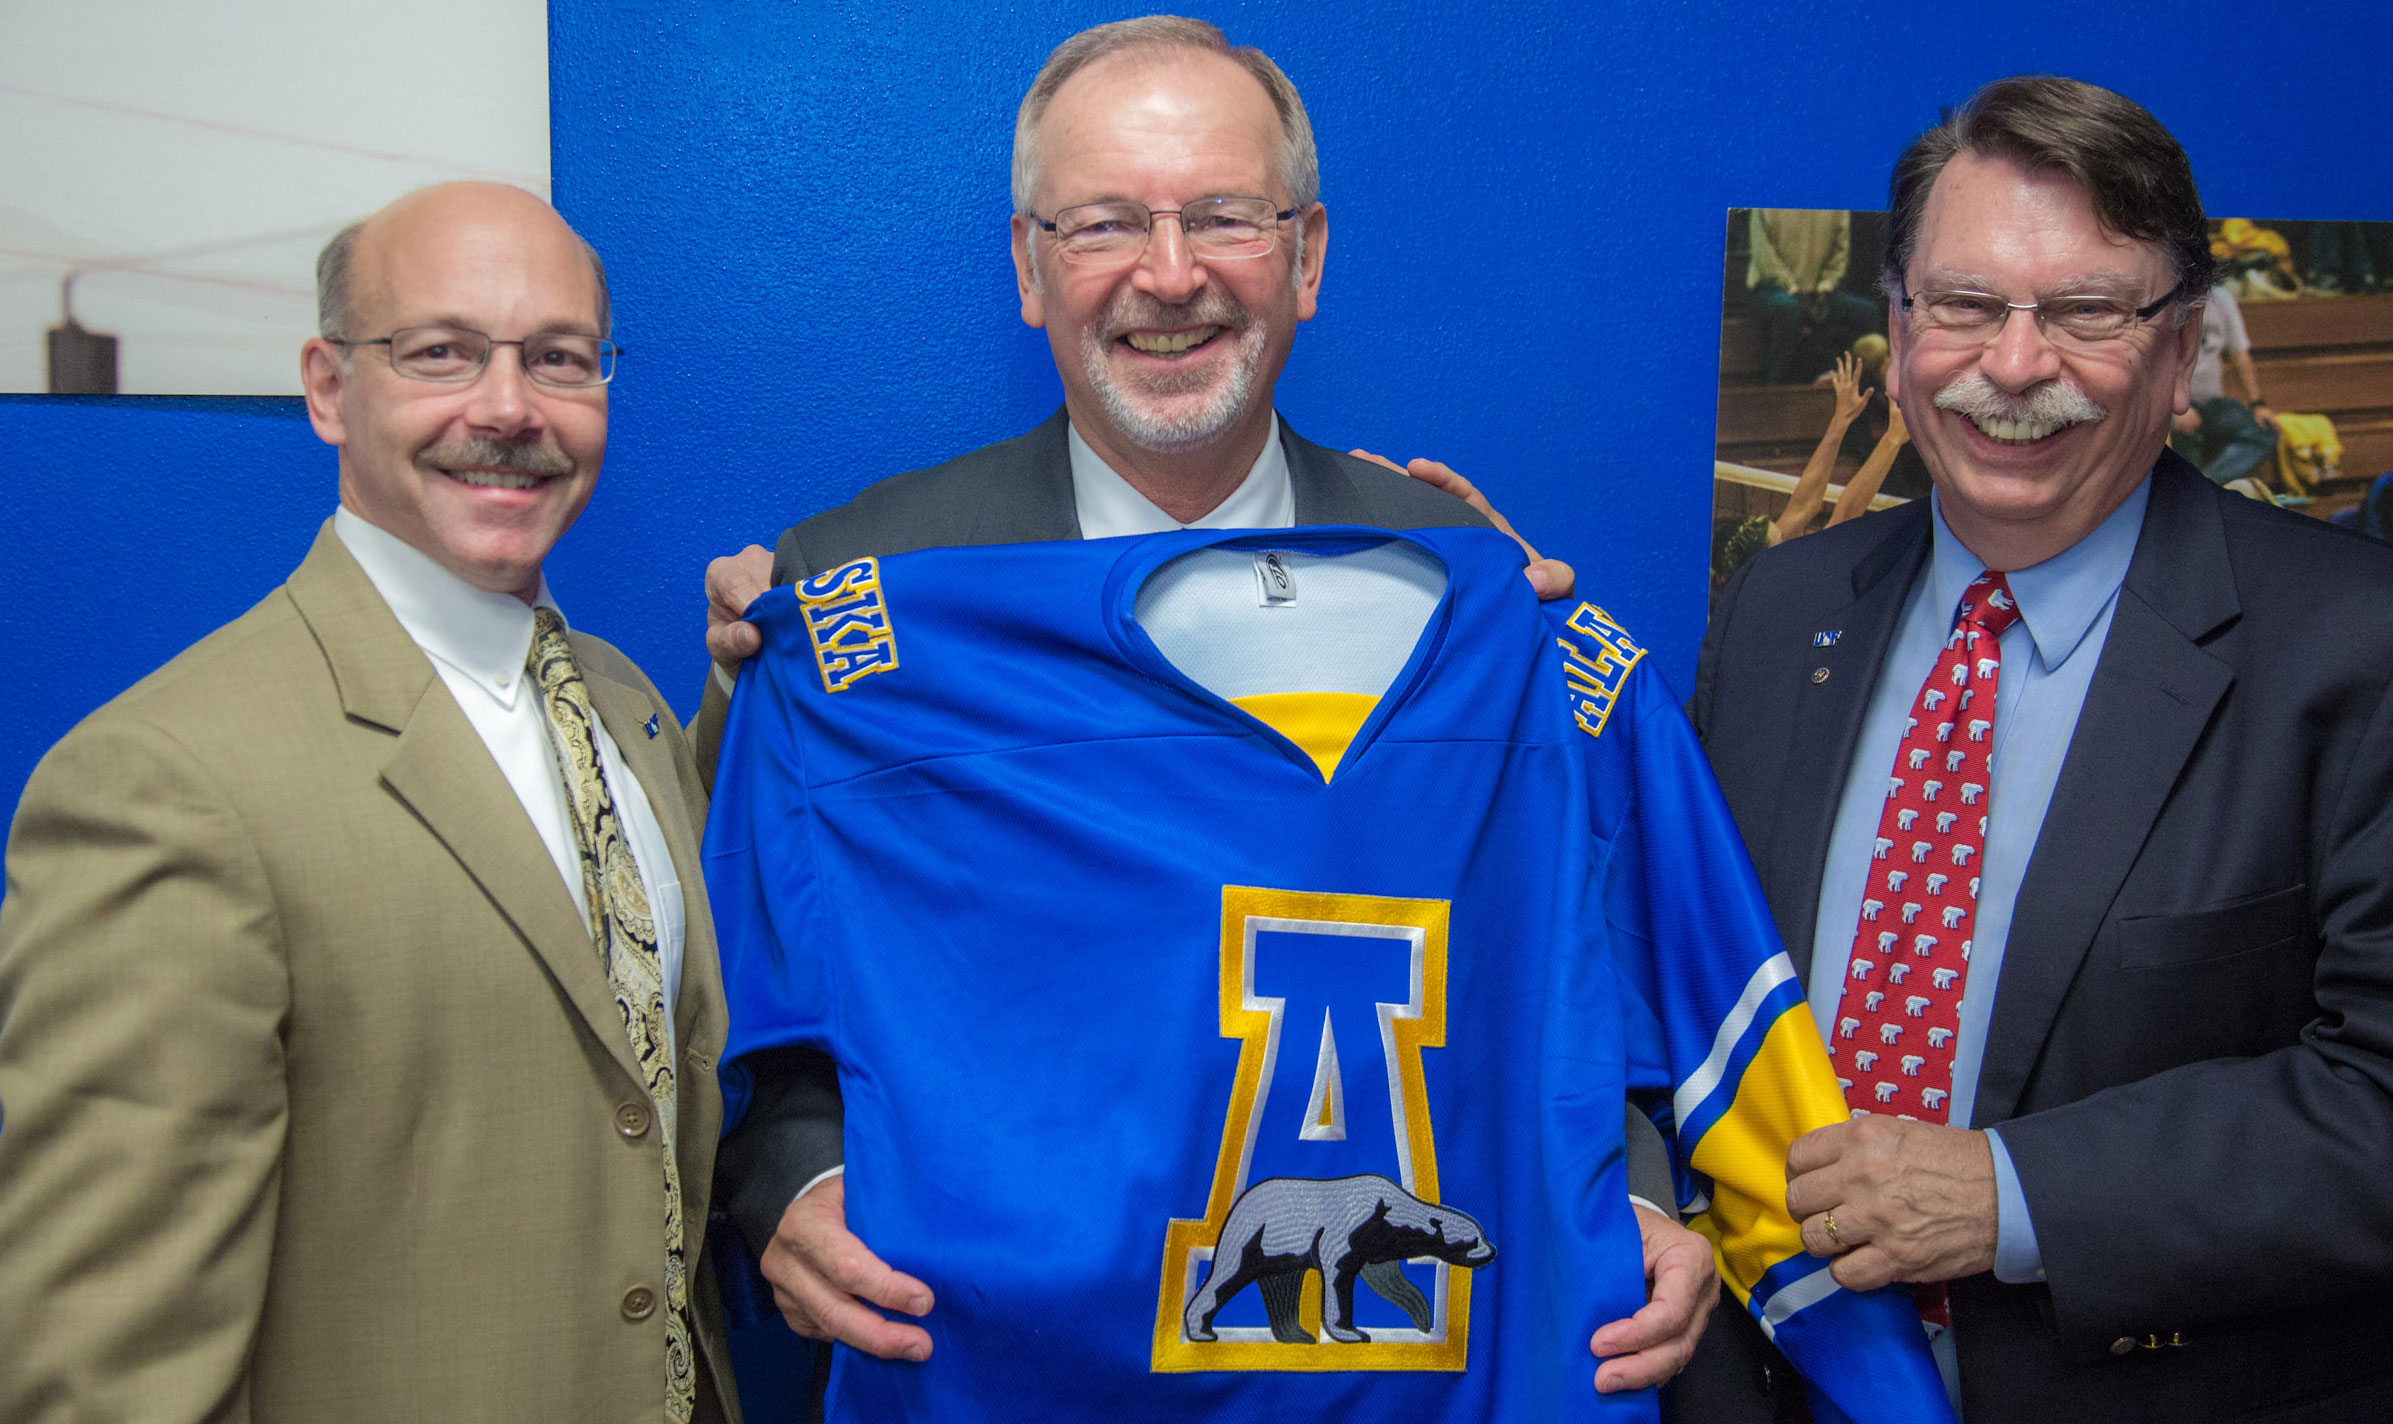 Vice Chancellor Mike Sfraga (left) and Chancellor Brian Rogers (right) introduce Gray at Friday's press conference. (UAF Photo by Todd Paris)